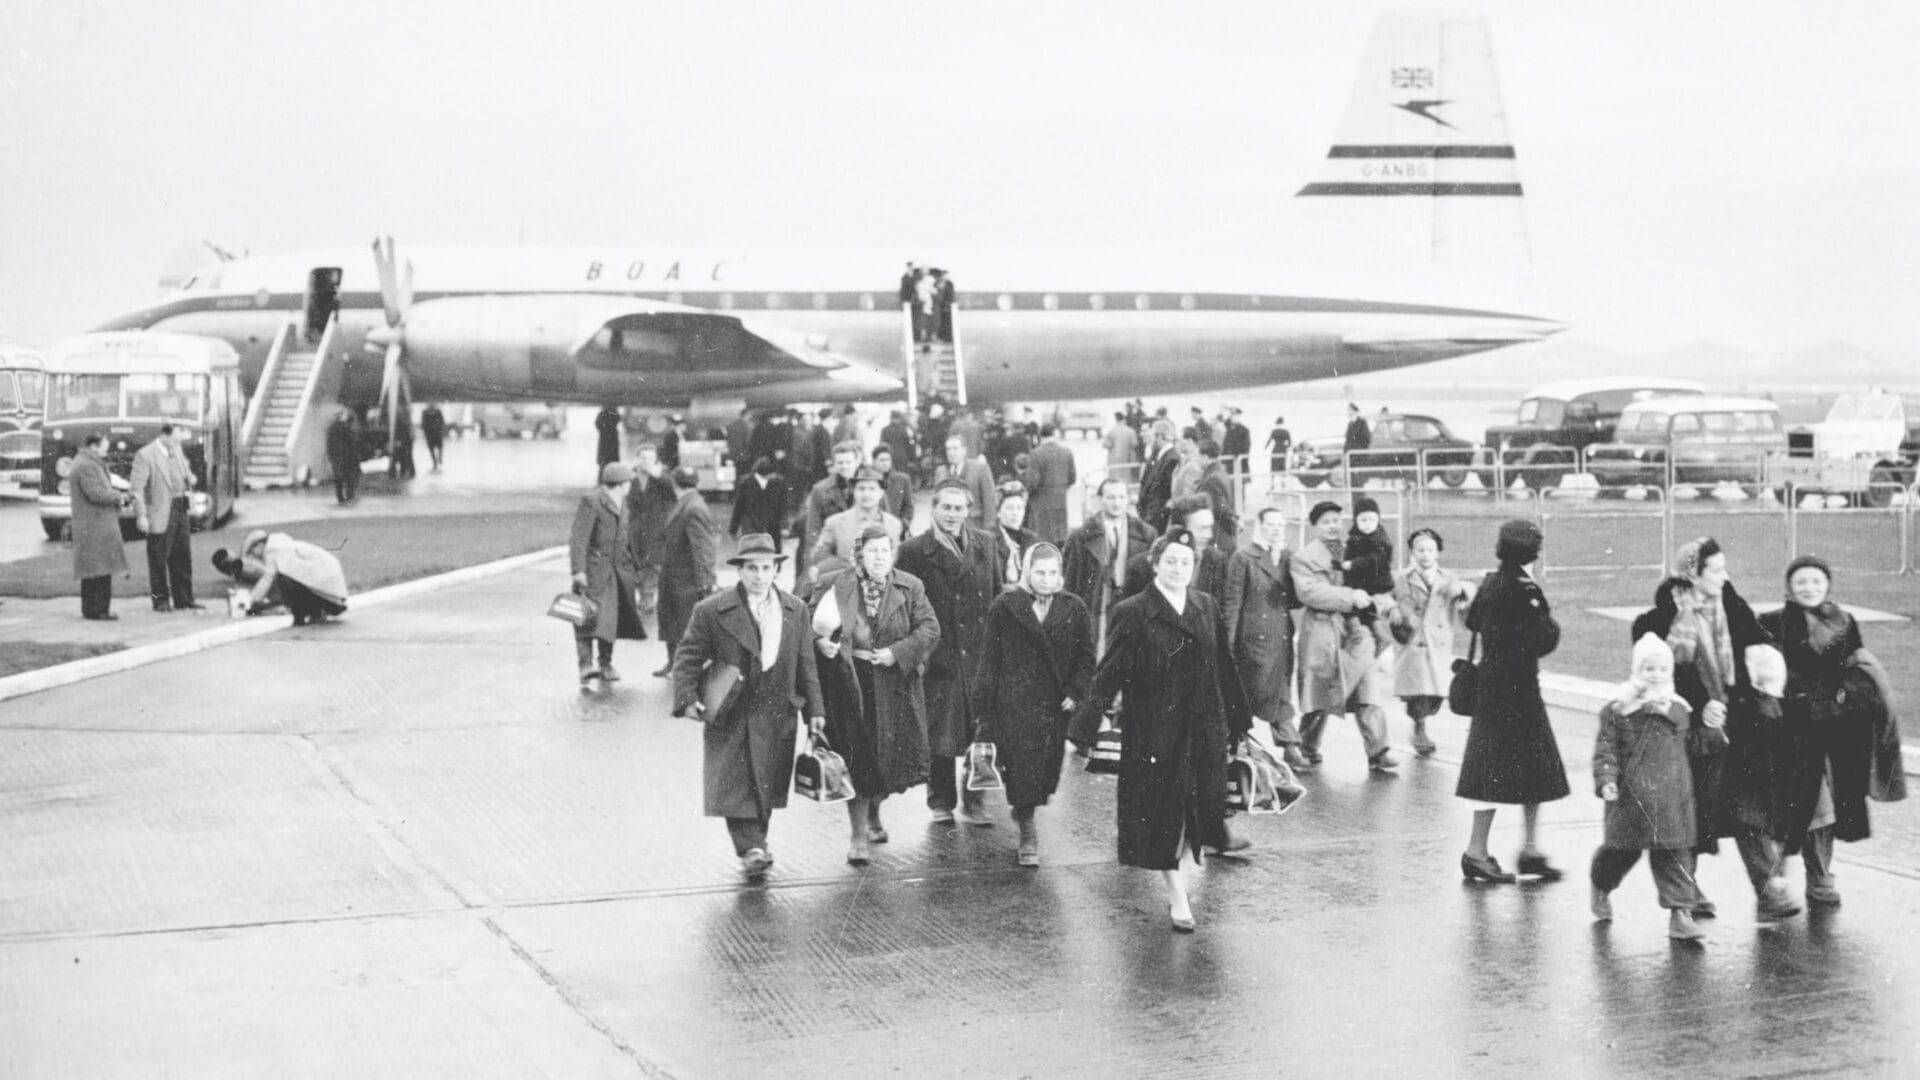 A group of (probably) Hungarian refugees arrive at Croydon Airport on 21 December 1956.